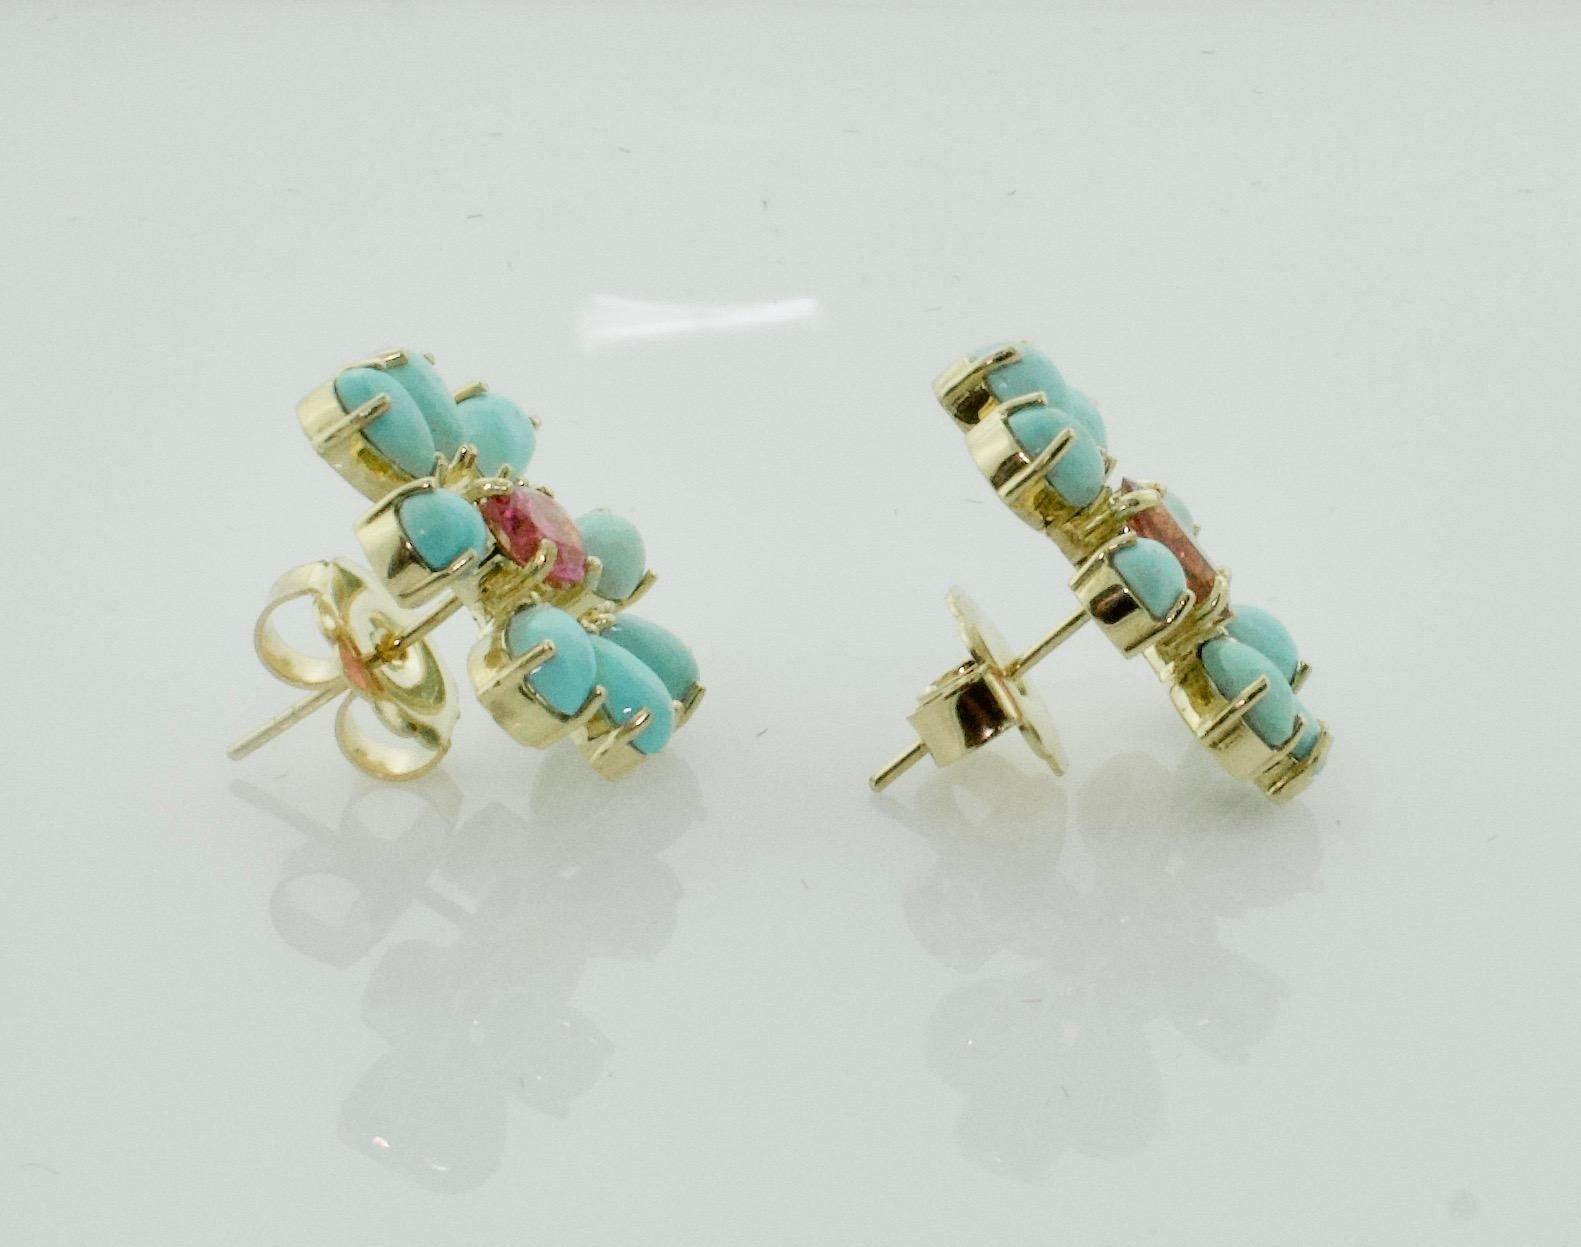 Sunburst Pink Tourmaline and Persian Turquoise Earrings in 18 Karat Yellow Gold In New Condition For Sale In Wailea, HI